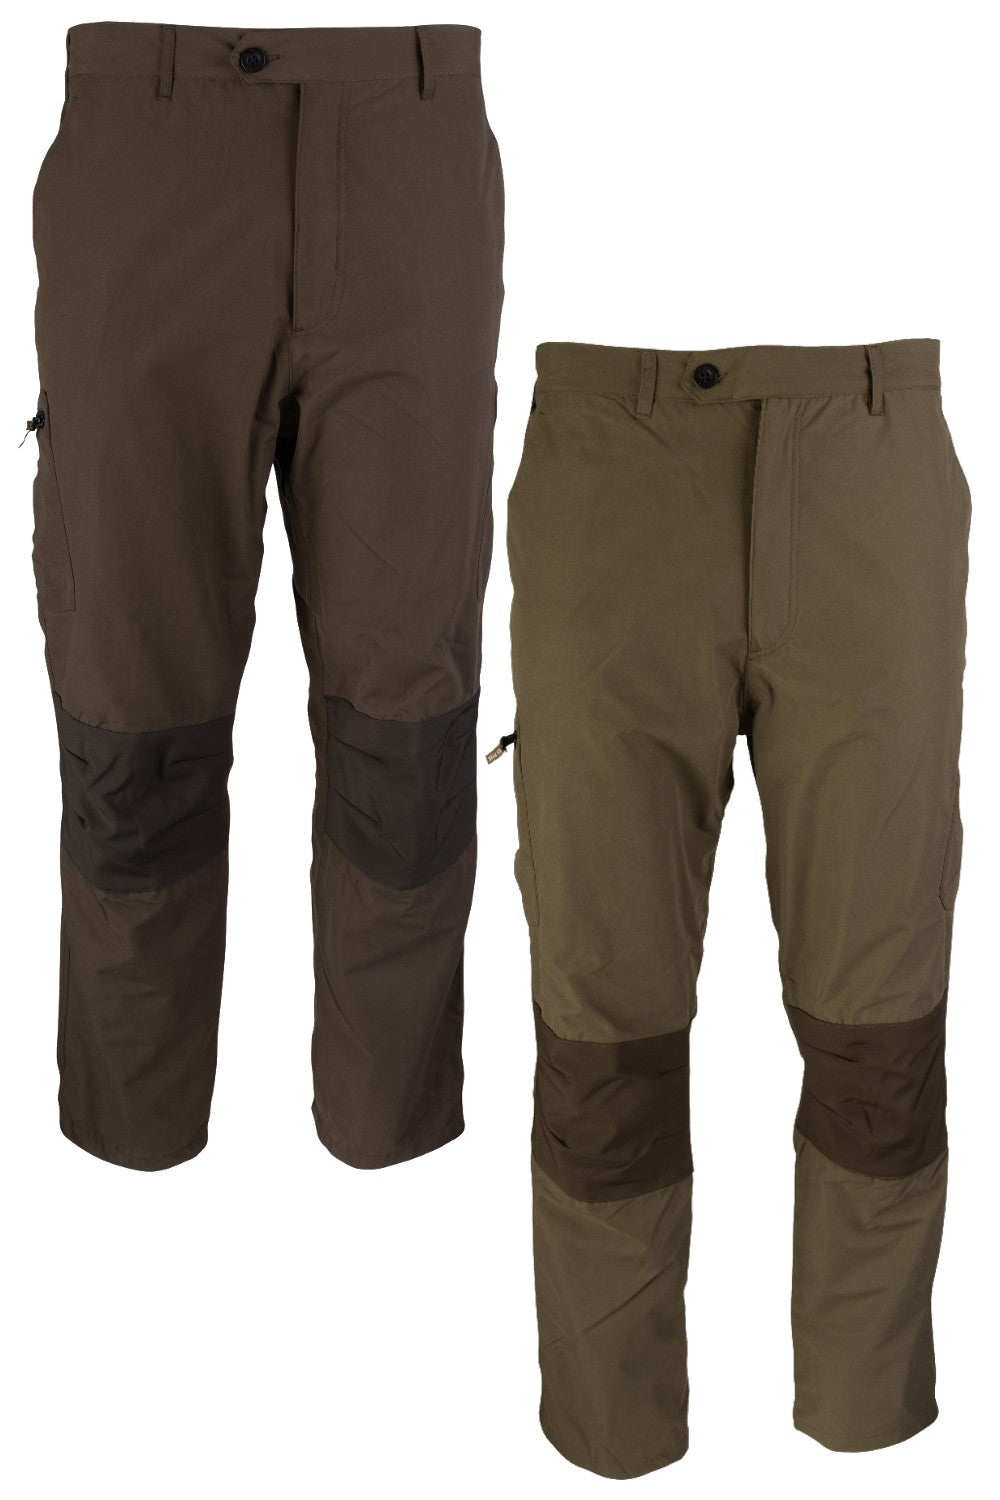 Jack Pyke Weardale Hunting Trousers In Green and Brown 